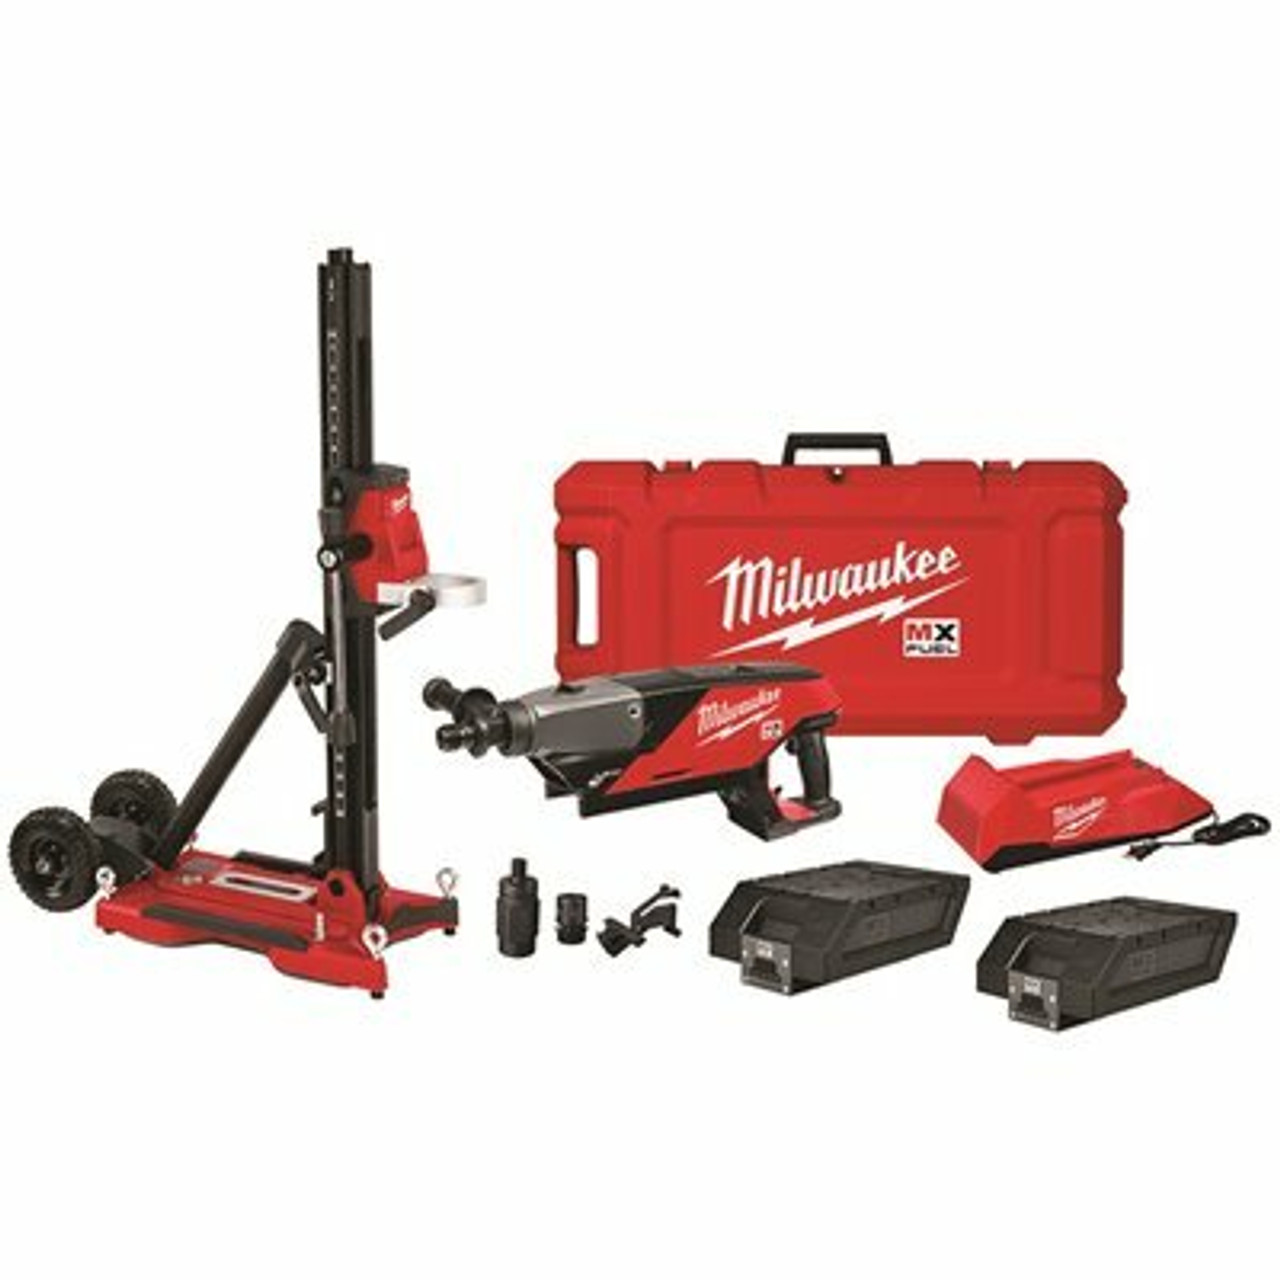 Milwaukee Mx Fuel Lithium-Ion Cordless Handheld Core Drill Kit With Stand, 2 Batteries And Charger